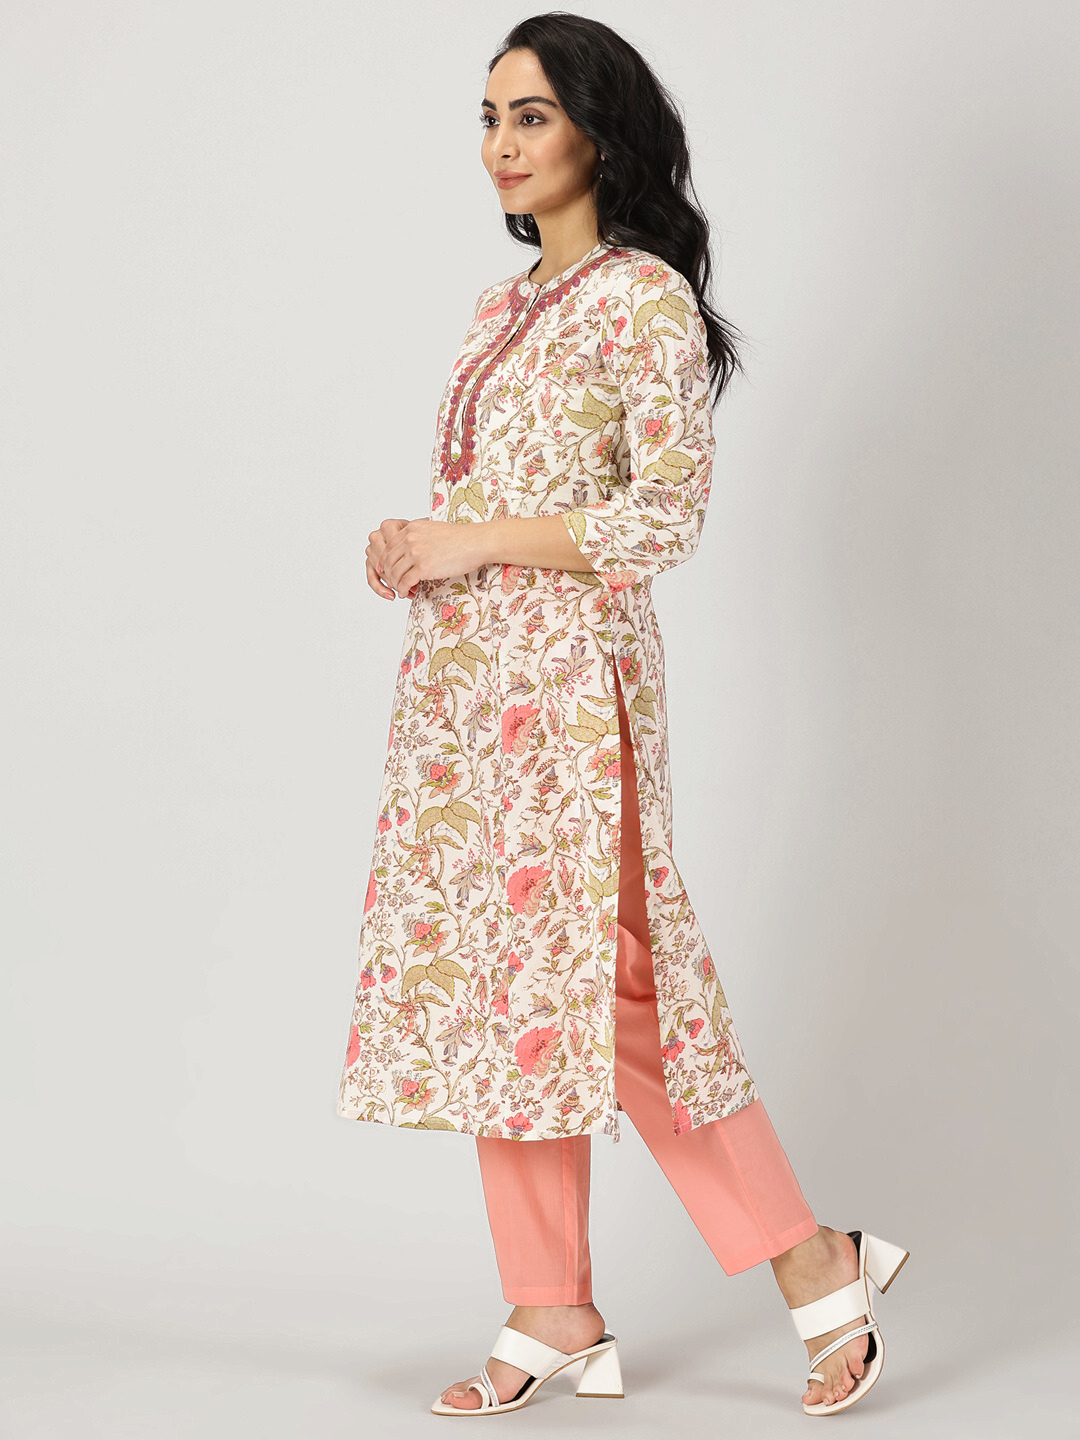 White-Peach Ethnic Floral Print Kurta with Neck Embroidery